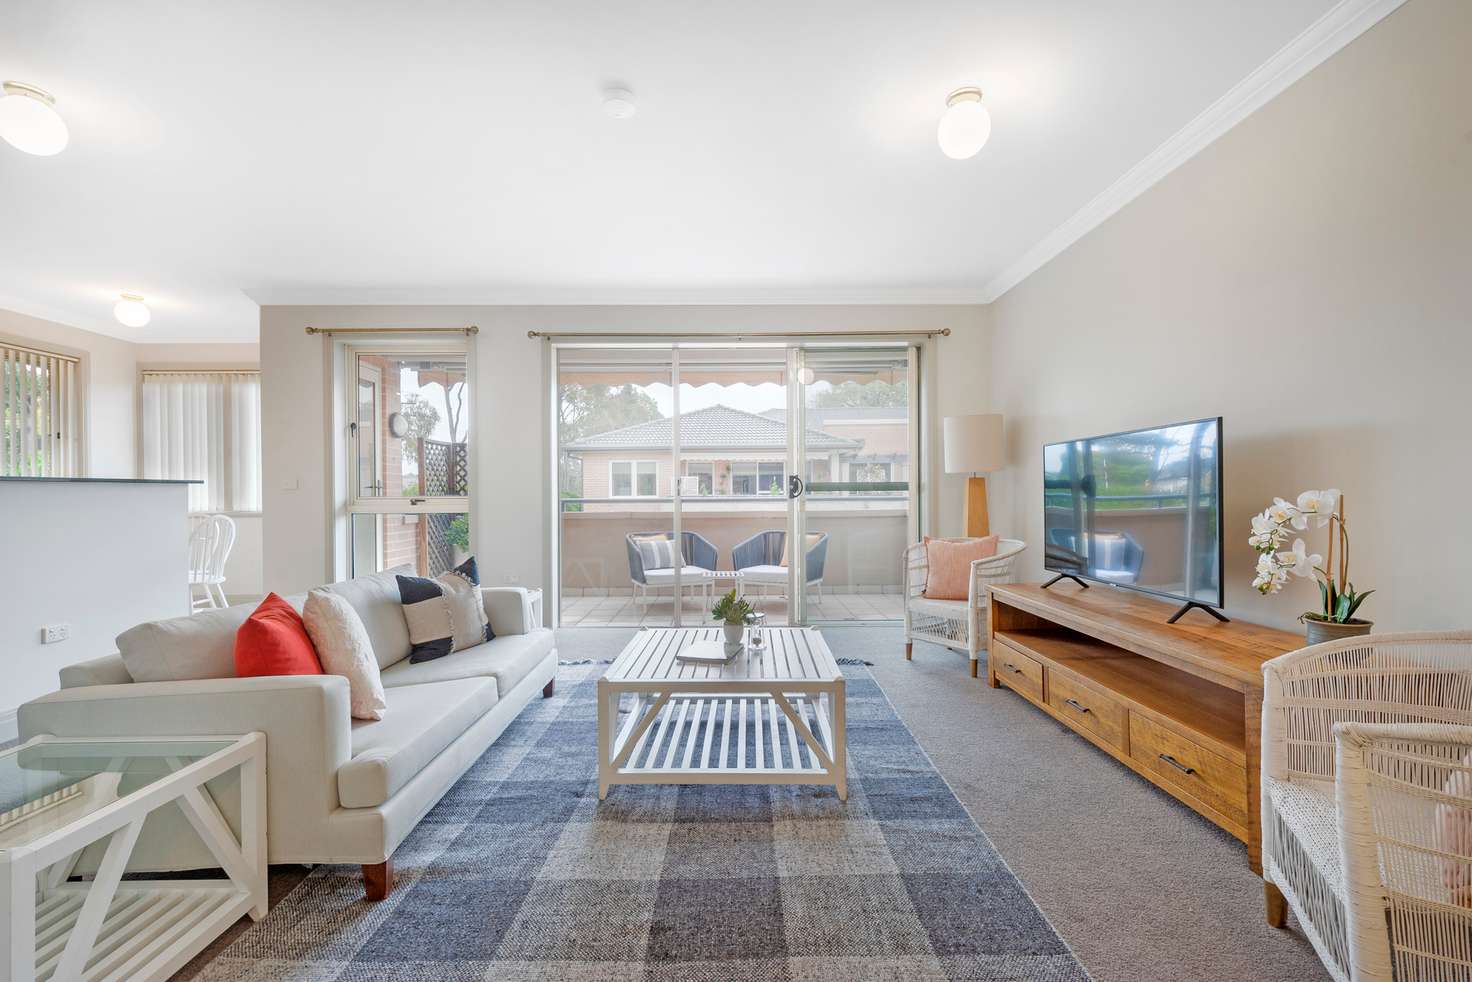 Main view of Homely apartment listing, 203/6 Karrabee Avenue, Huntleys Cove NSW 2111